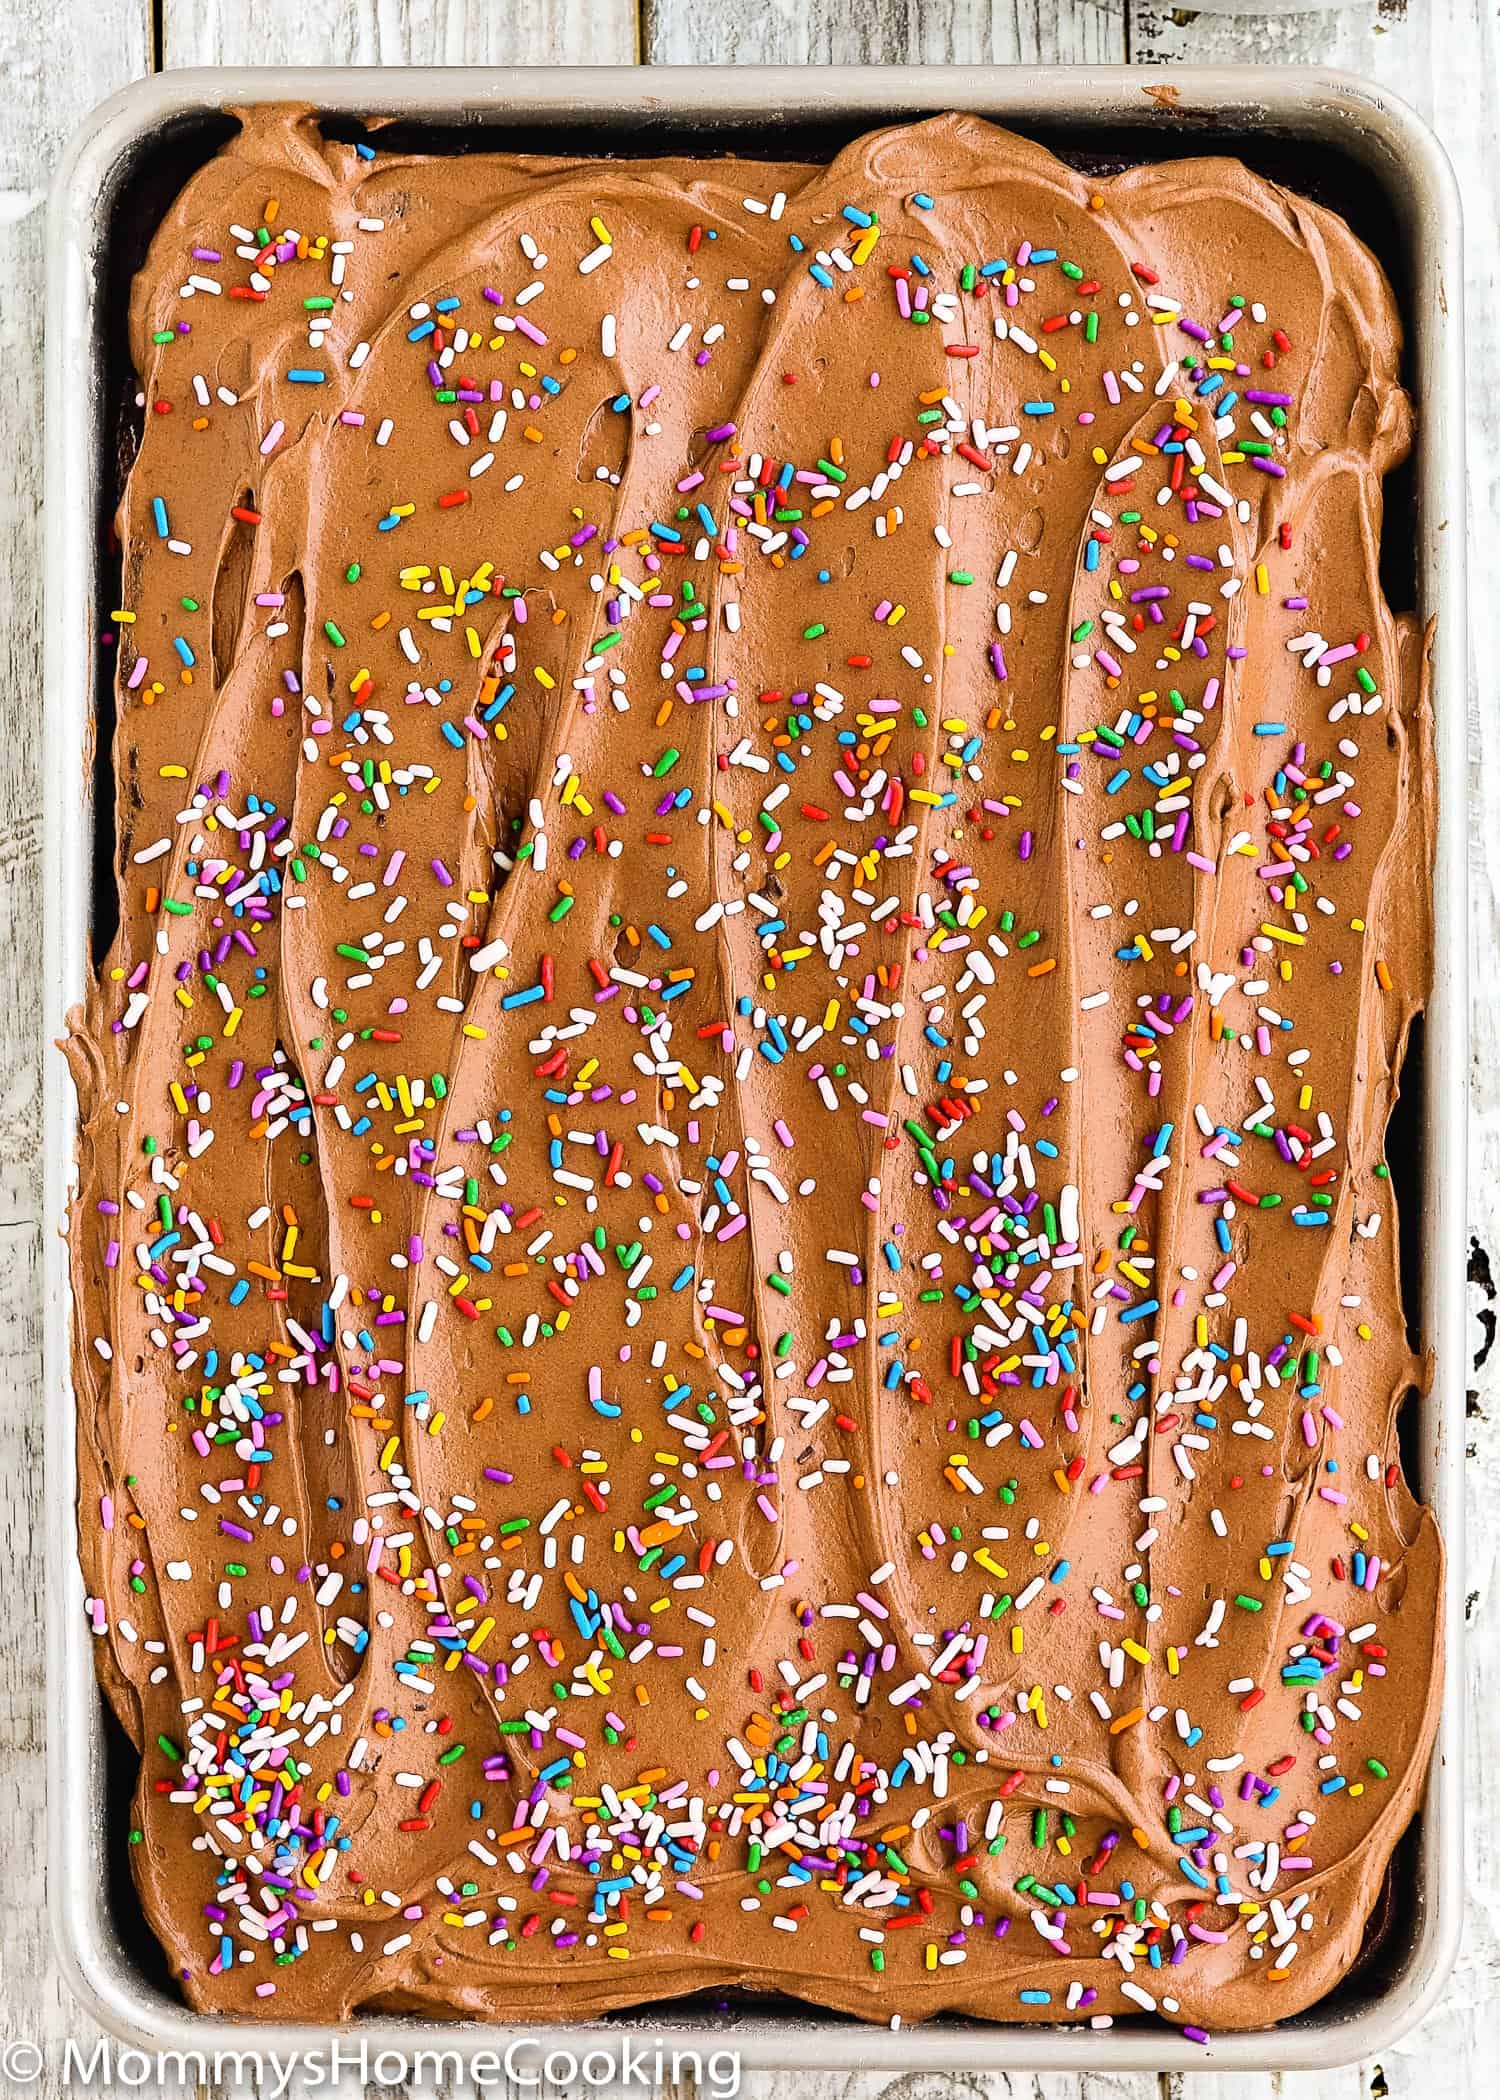 A pan of eggless chocolate cake with chocolate frosting with sprinkles on top.